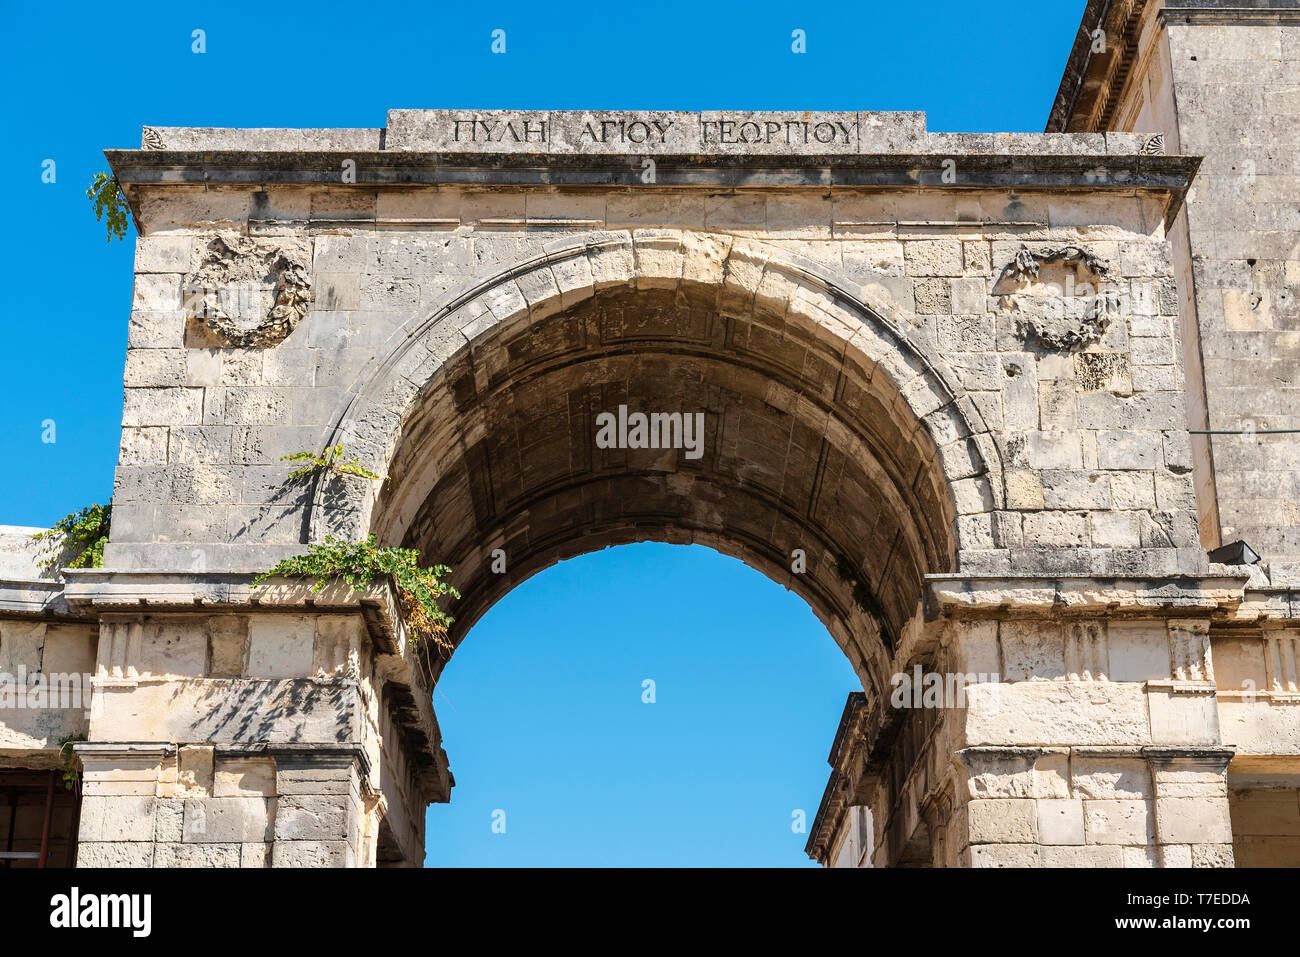 Archway, Asian Art Museum, Old town, Kerkyra, Corfou, îles Ioniennes, Grèce Banque D'Images